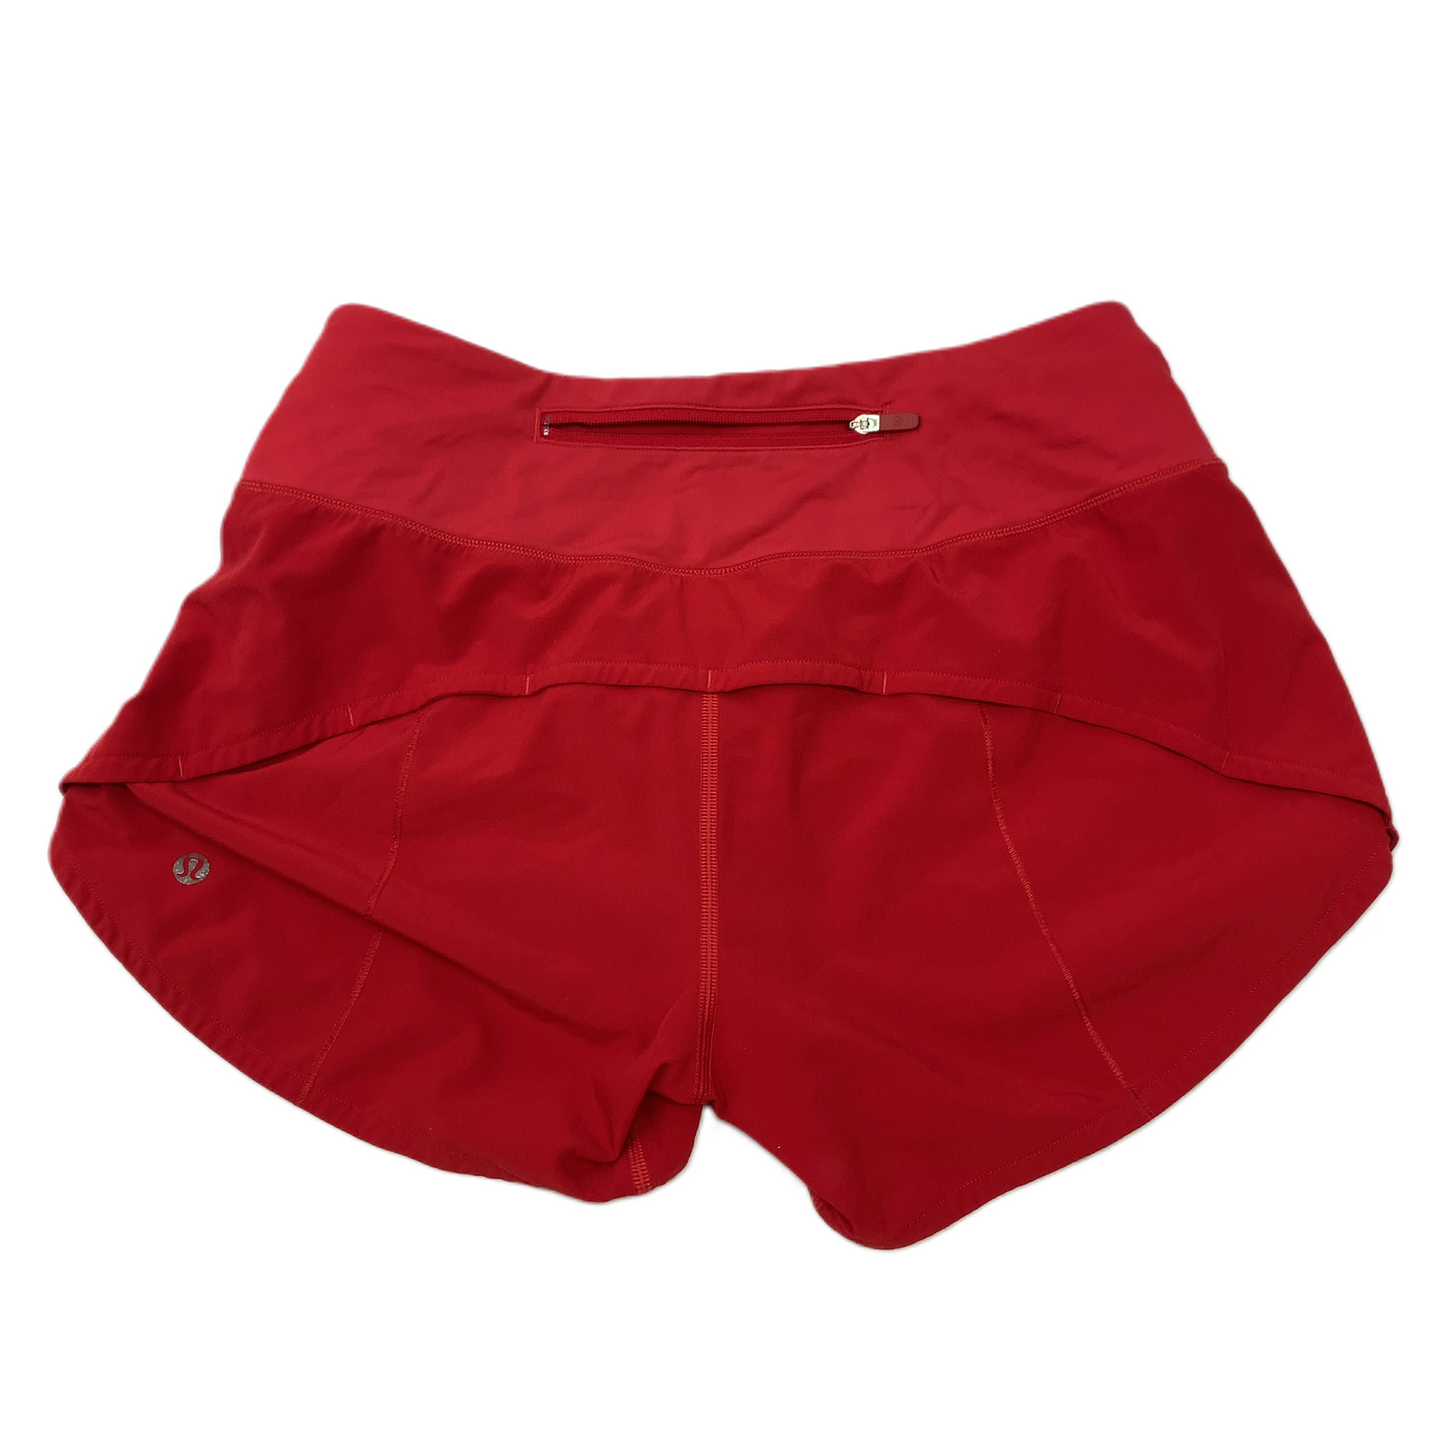 Red  Athletic Shorts By Lululemon  Size: S